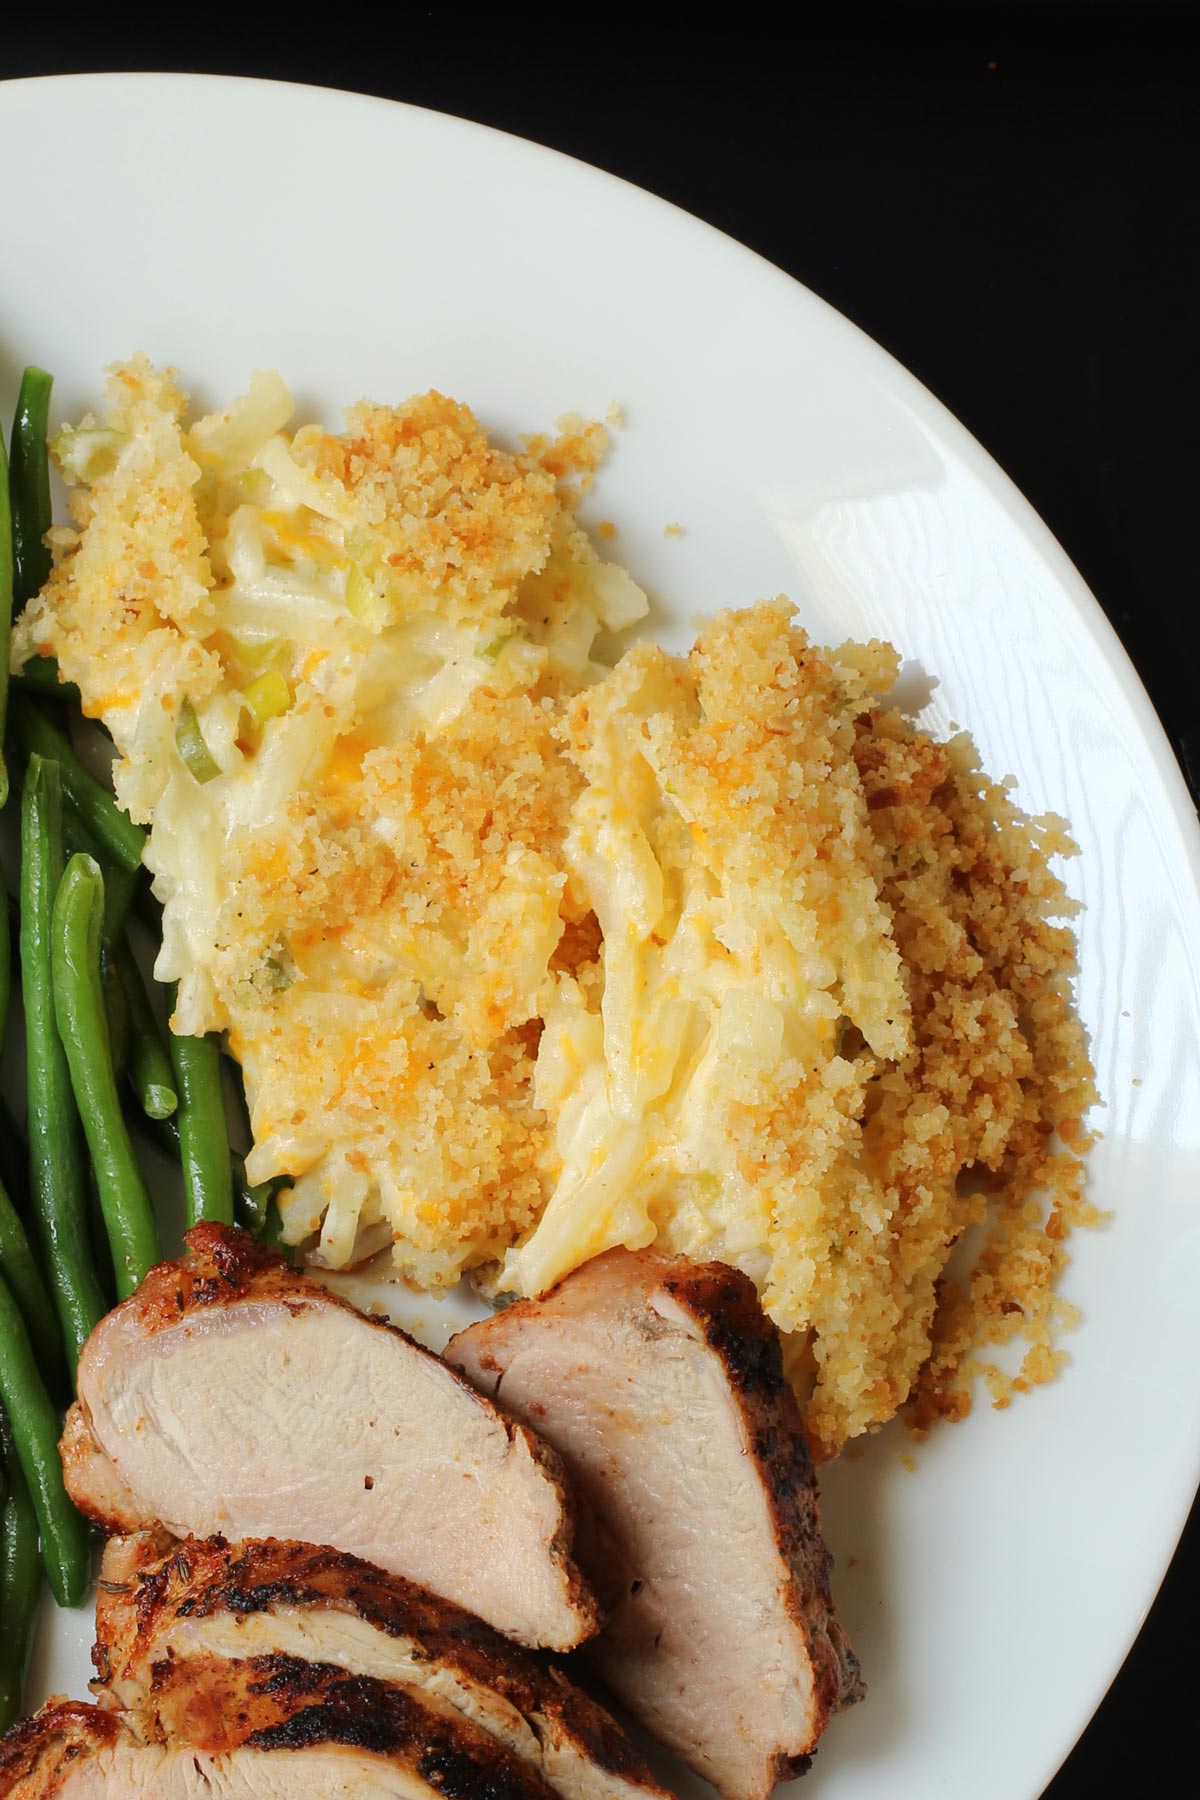 dinner plate closeup view of cheese hashbrown casserole with green beans and grilled pork.